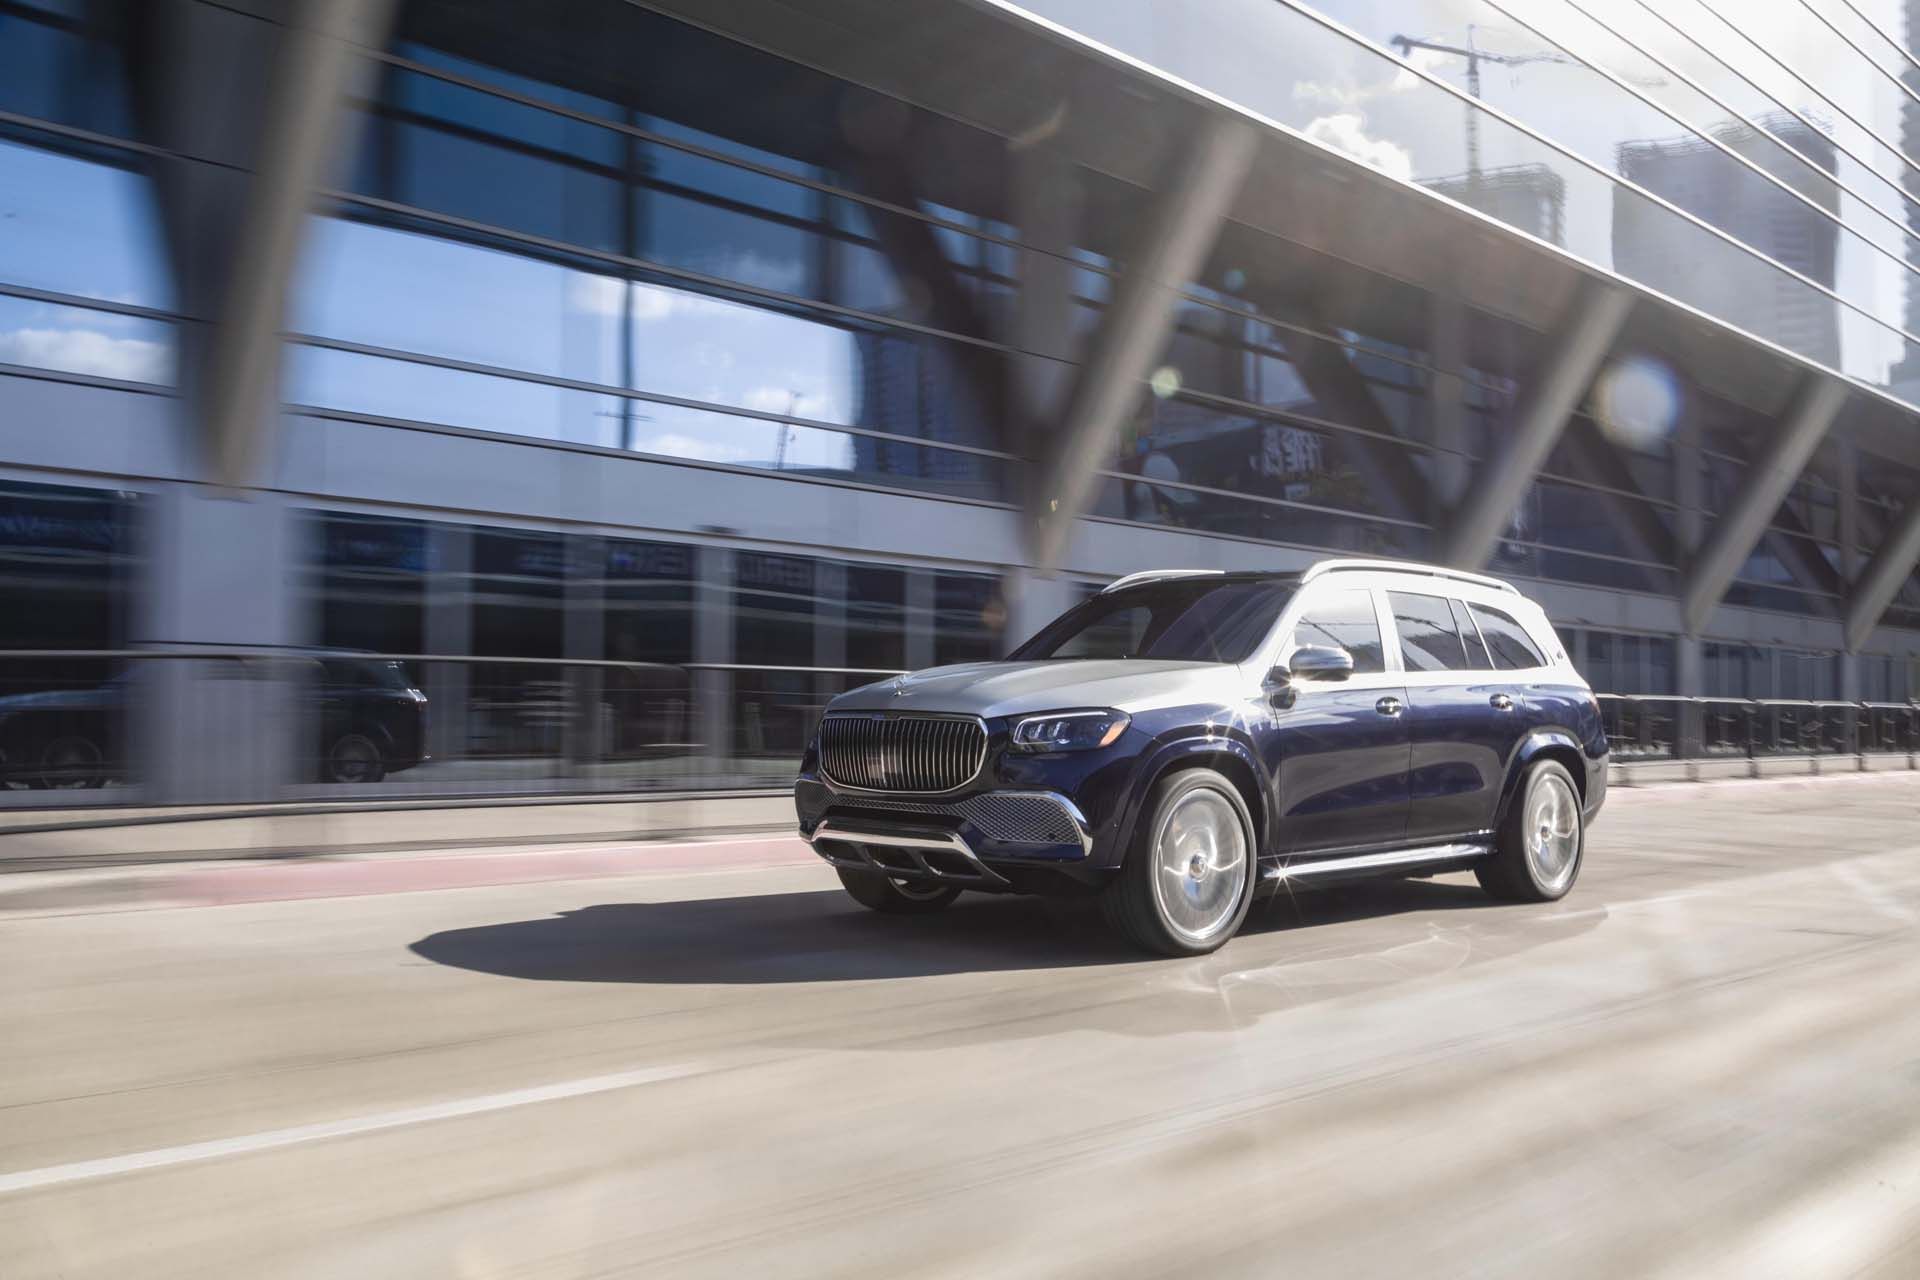 First Drive Review: 2021 Mercedes Benz Maybach GLS600 Exudes Elegance, Just Don't Overpack